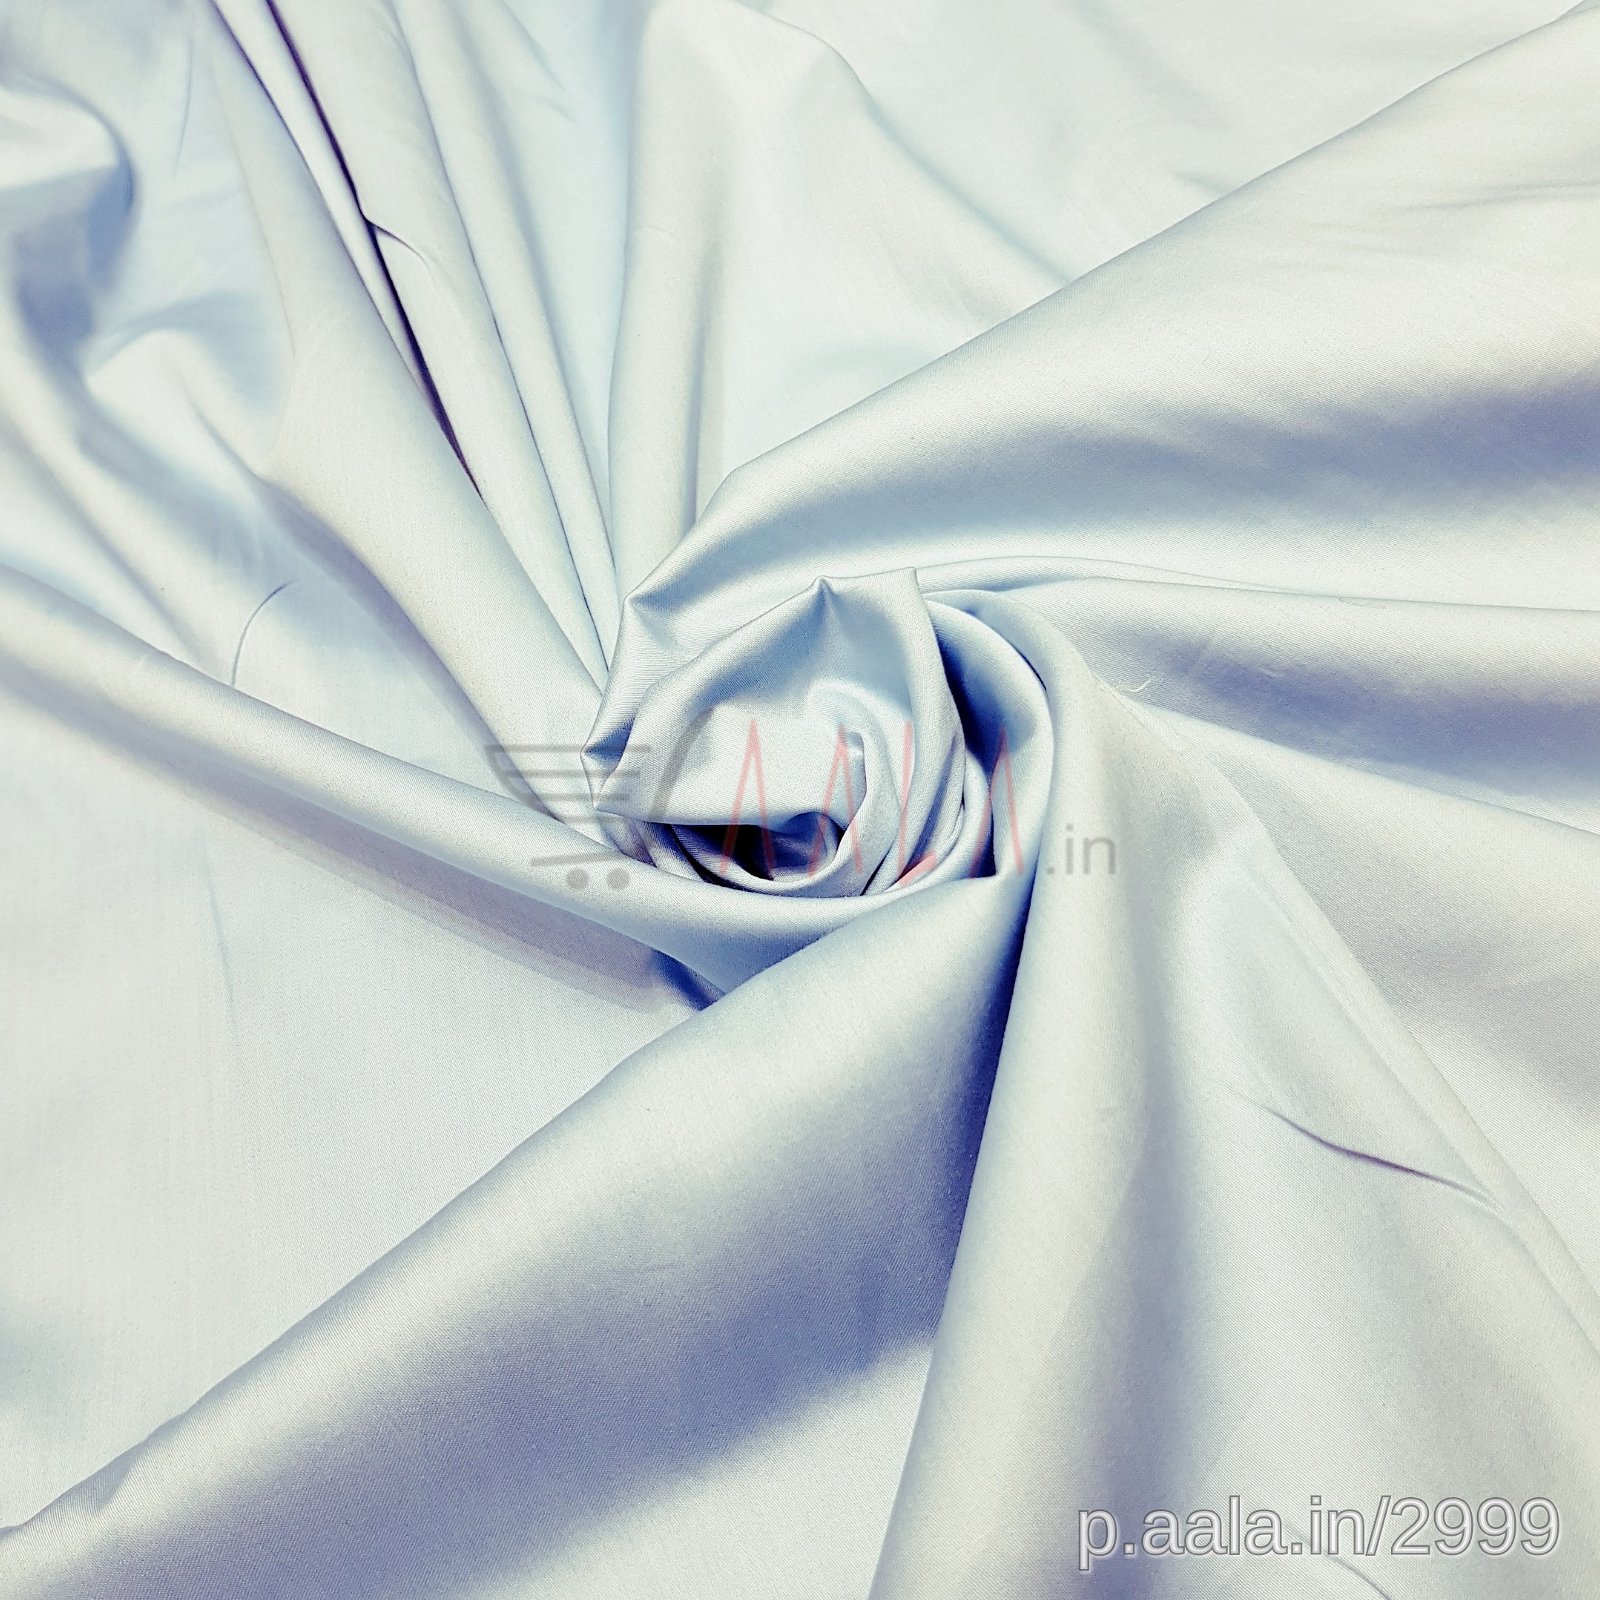 Satin Cotton 44 Inches Dyed Per Metre #2999